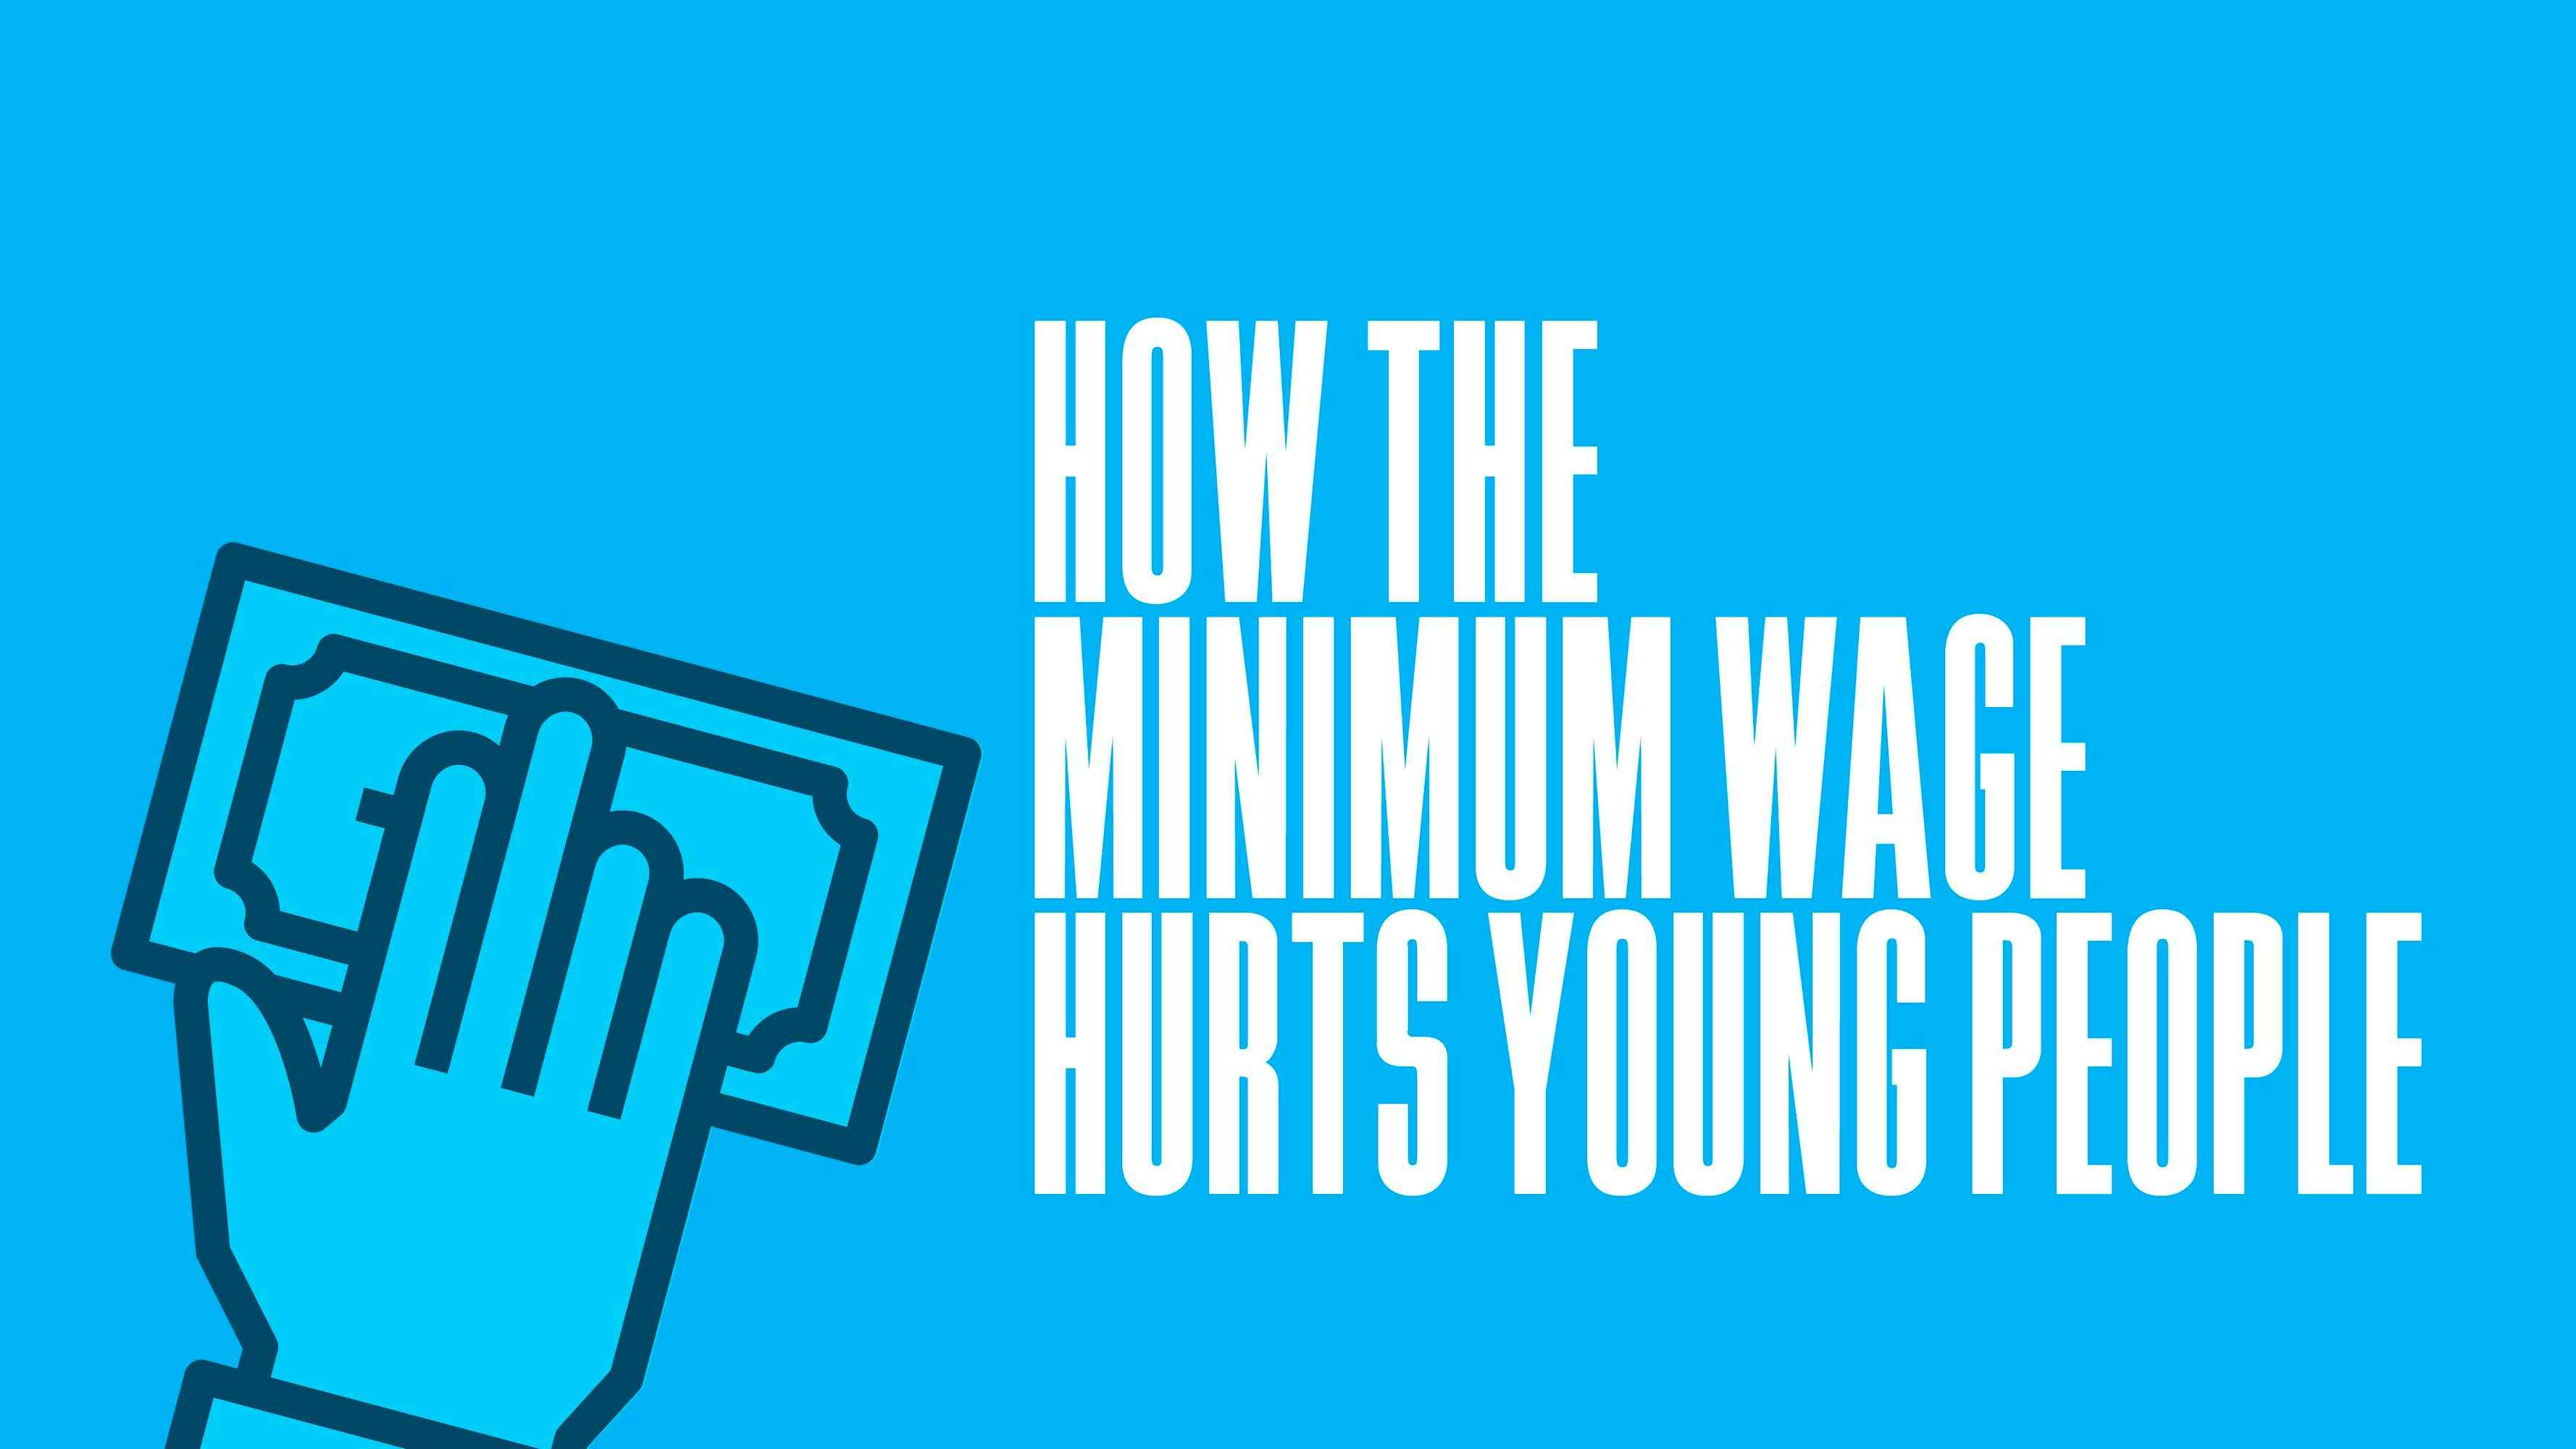 How the Minimum Wage Hurts Young People